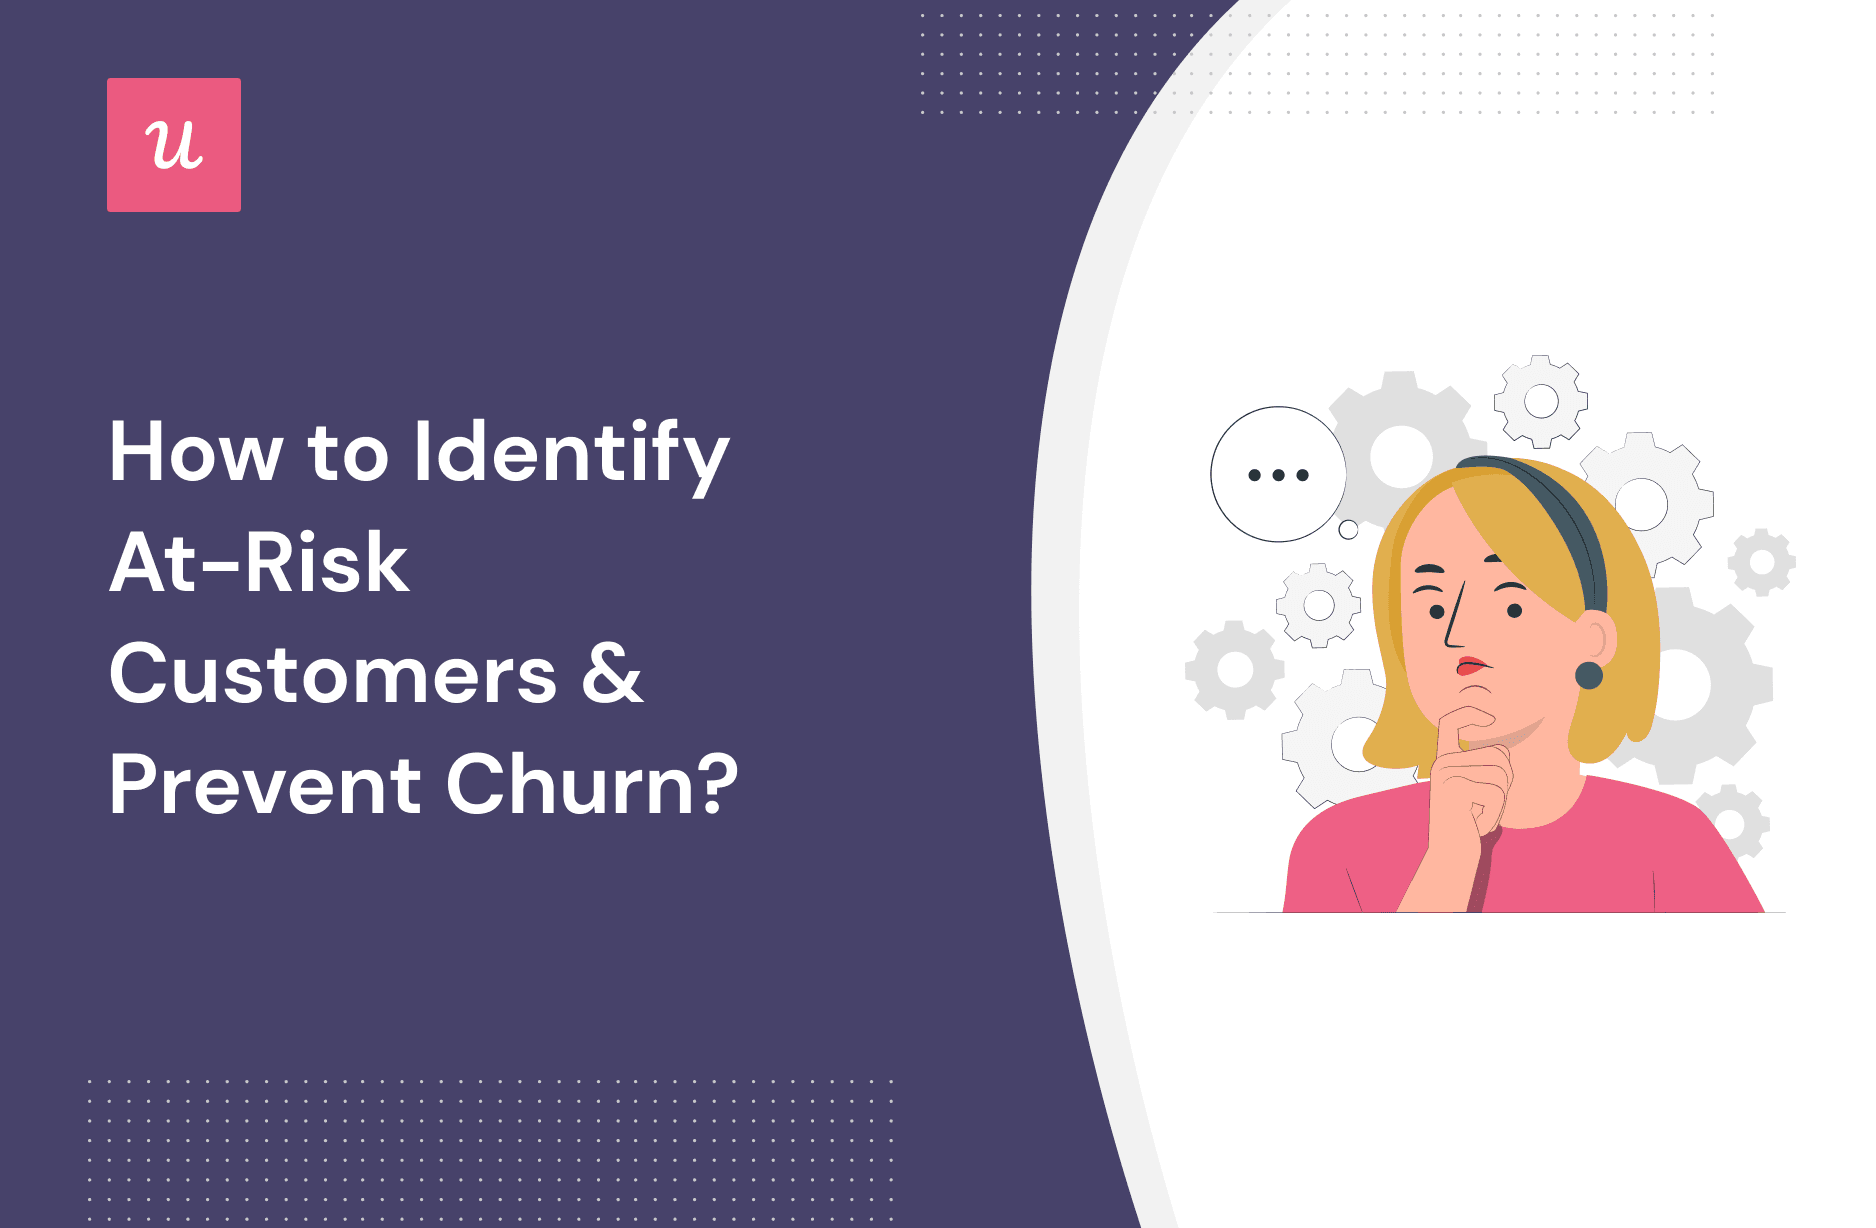 How To Identify At-Risk Customers & Prevent Churn? cover